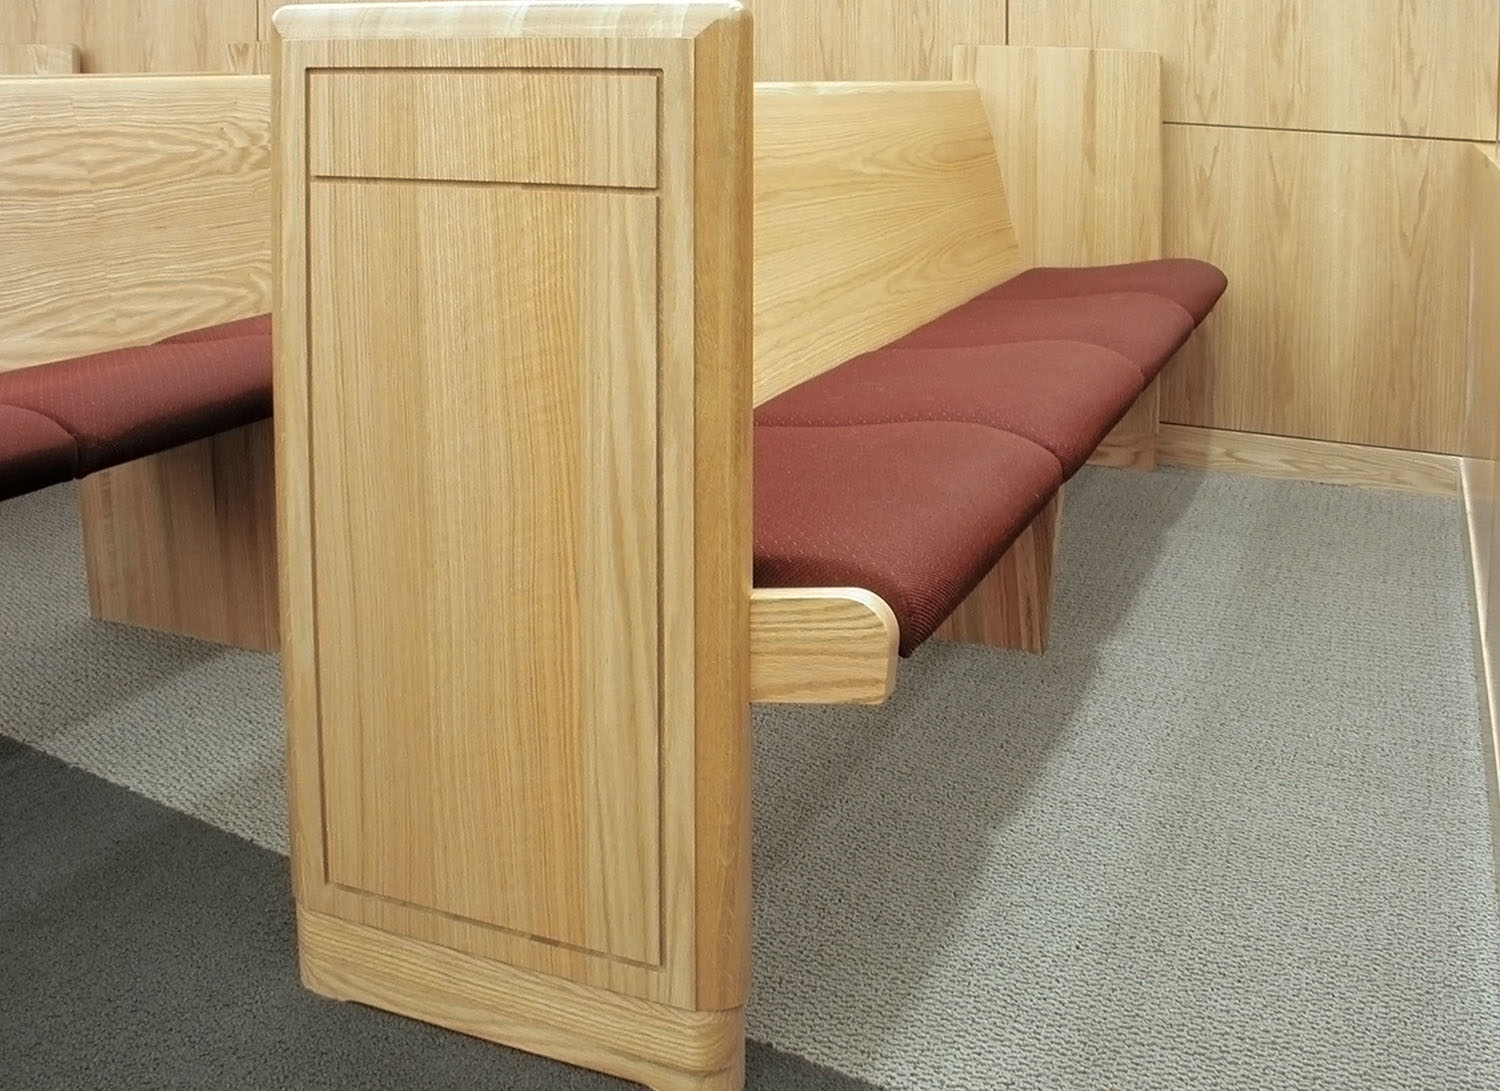 Upholstered Definity Seat and Wood Back Benches inside Brighton Police Court - Brighton, CO